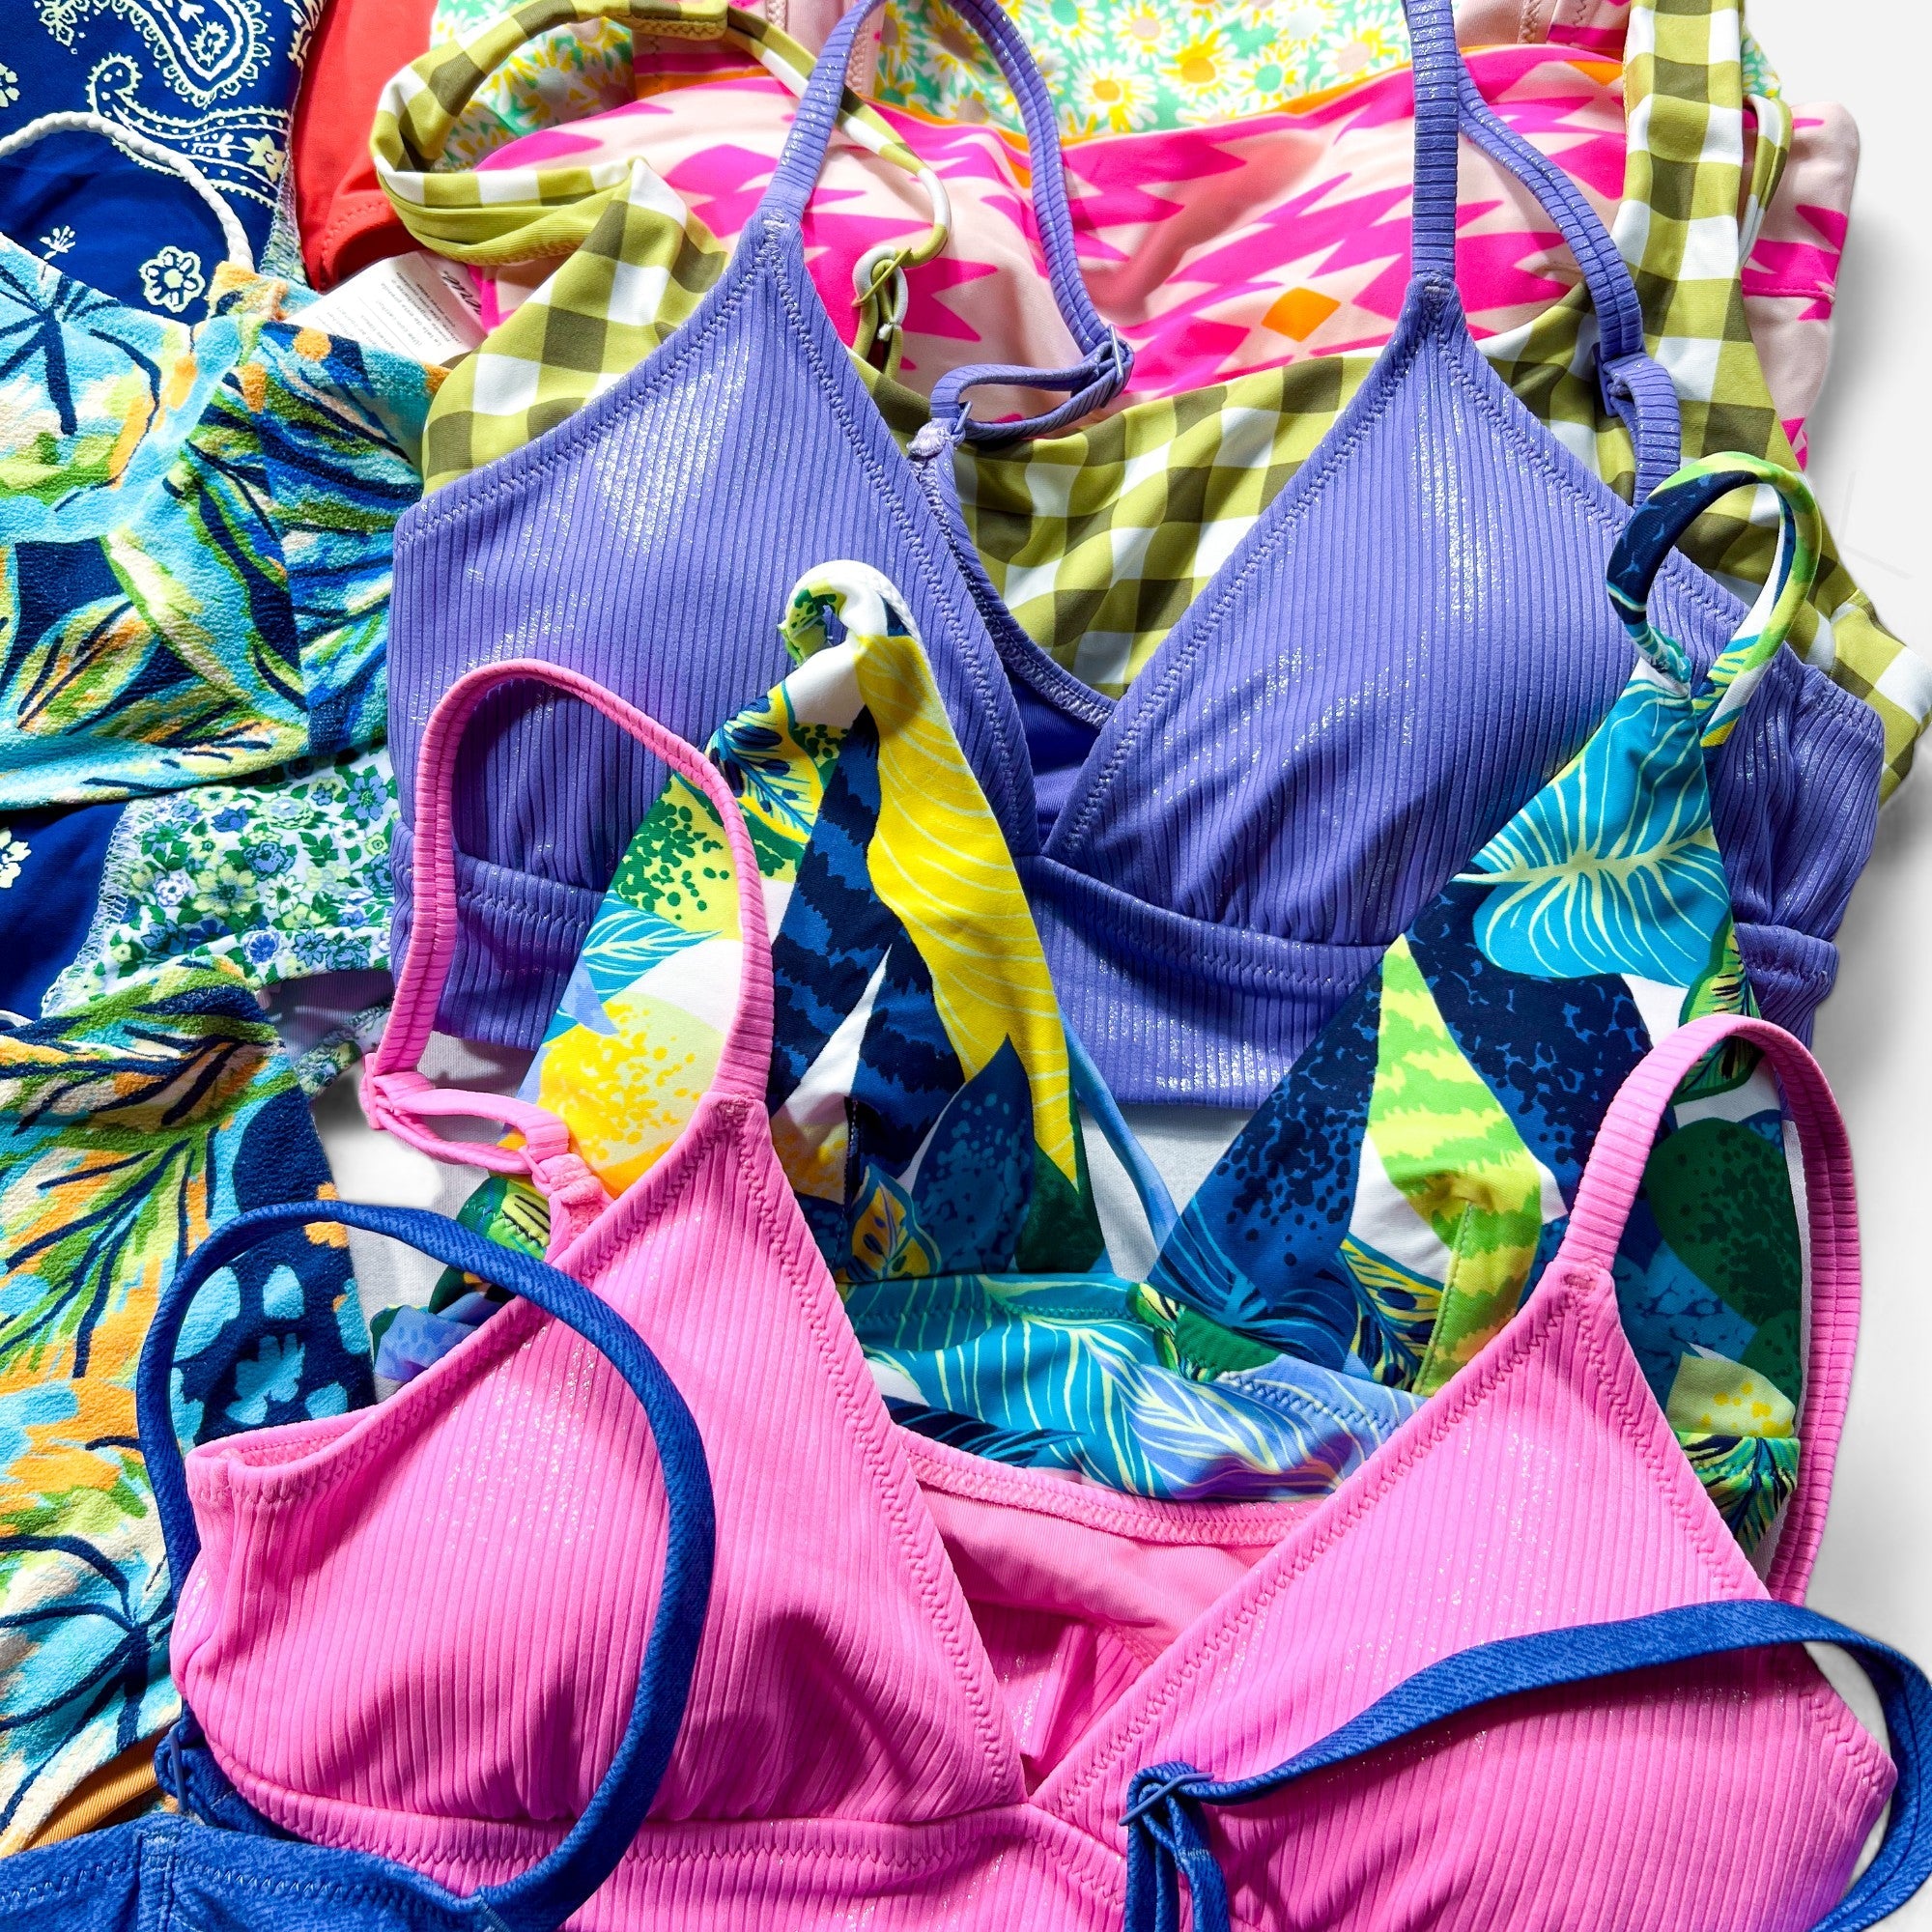 Aerie Swimwear Women's New Wholesale - Boutique by the Box Wholesale for Resellers